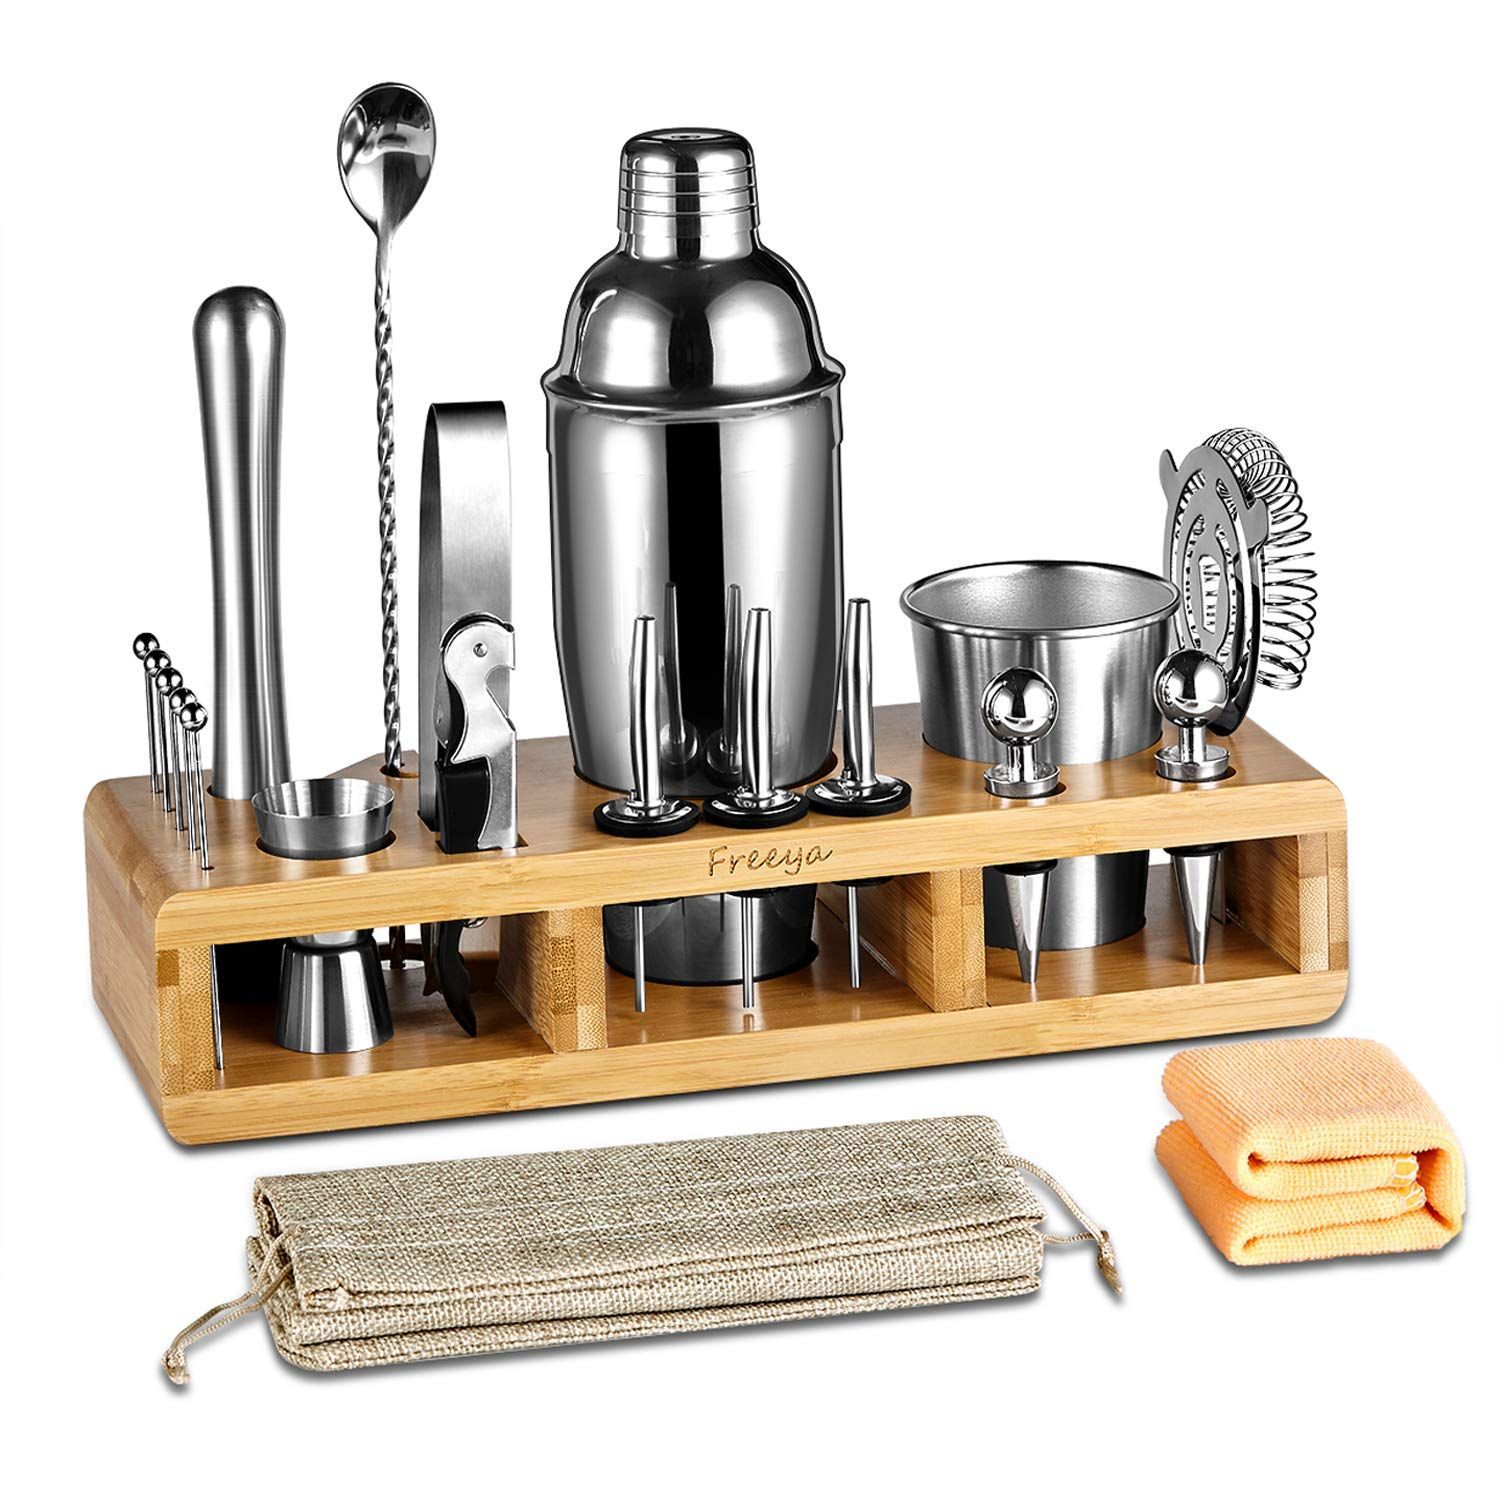 Complete 21-Pieces Bartender Kit, Freeya Premium Cocktail Bar Shaker Set , Stainless Steel Bar Tools / Bar Accessories -Beautiful Cocktail Shaker Set with Bamboo Stand, Storage Bag and Towel -   18 beauty Bar tool ideas